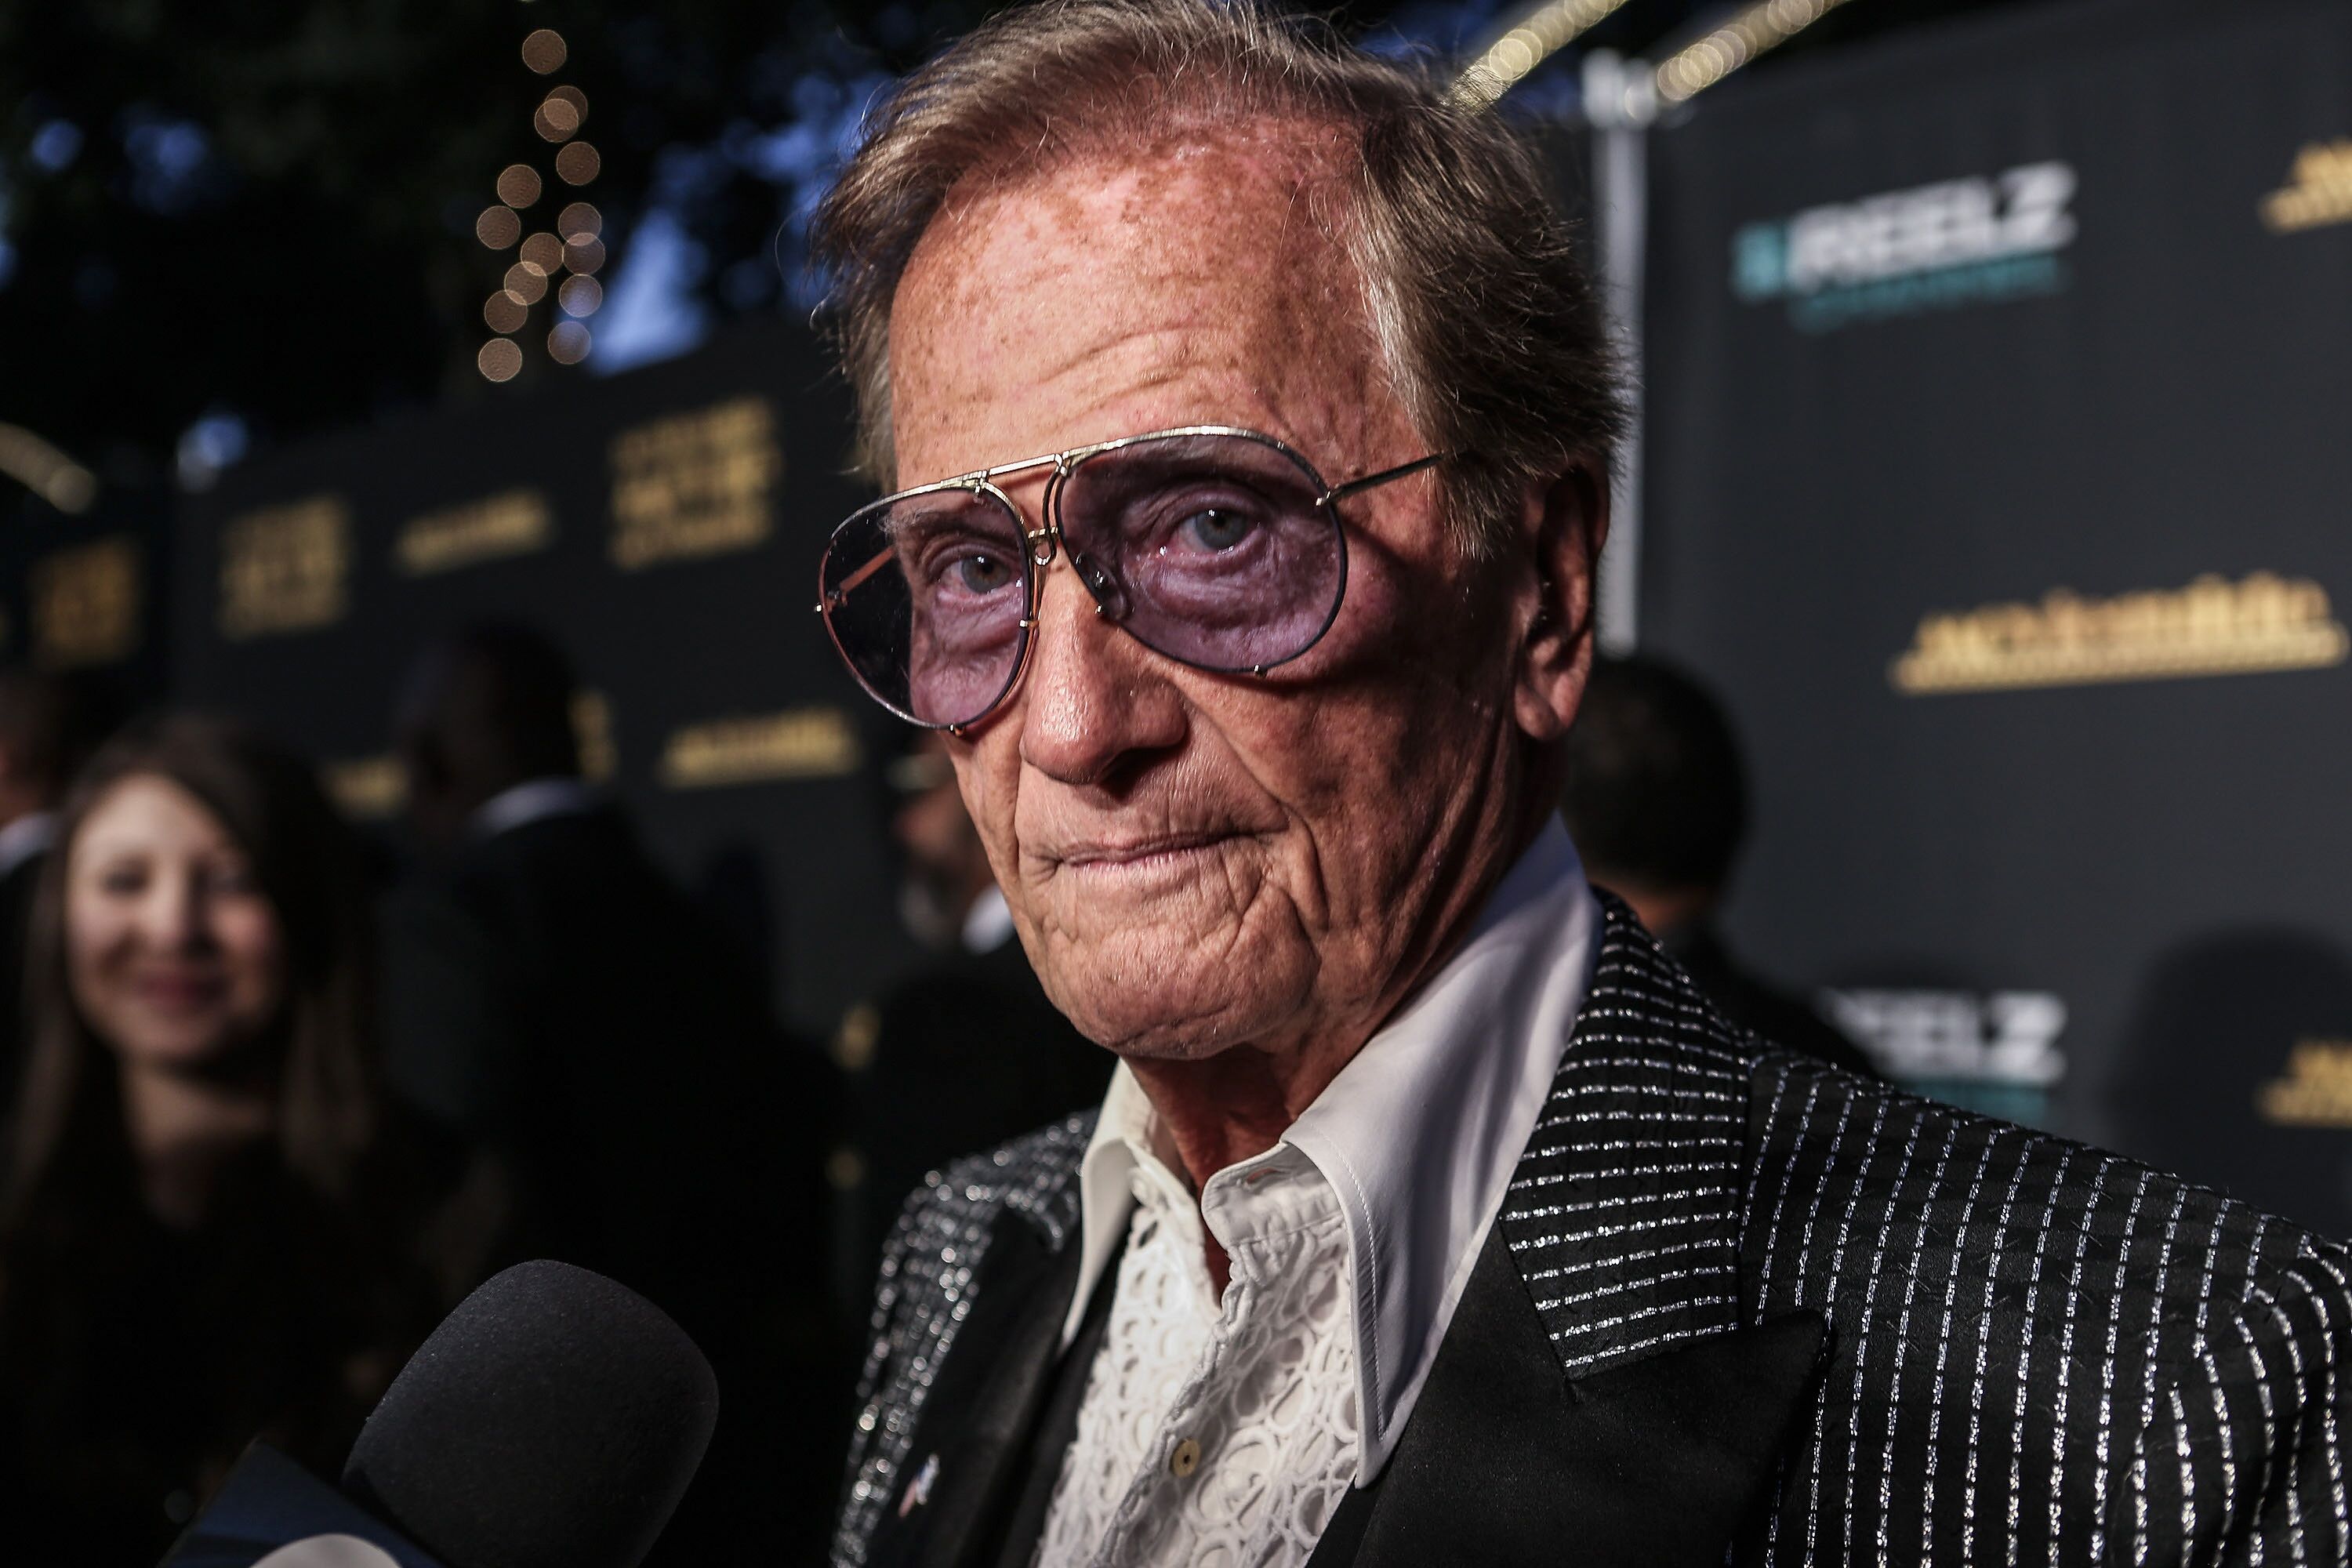 Pat Boone Once Opened up about Losing His Wife of 65 Years Shirley